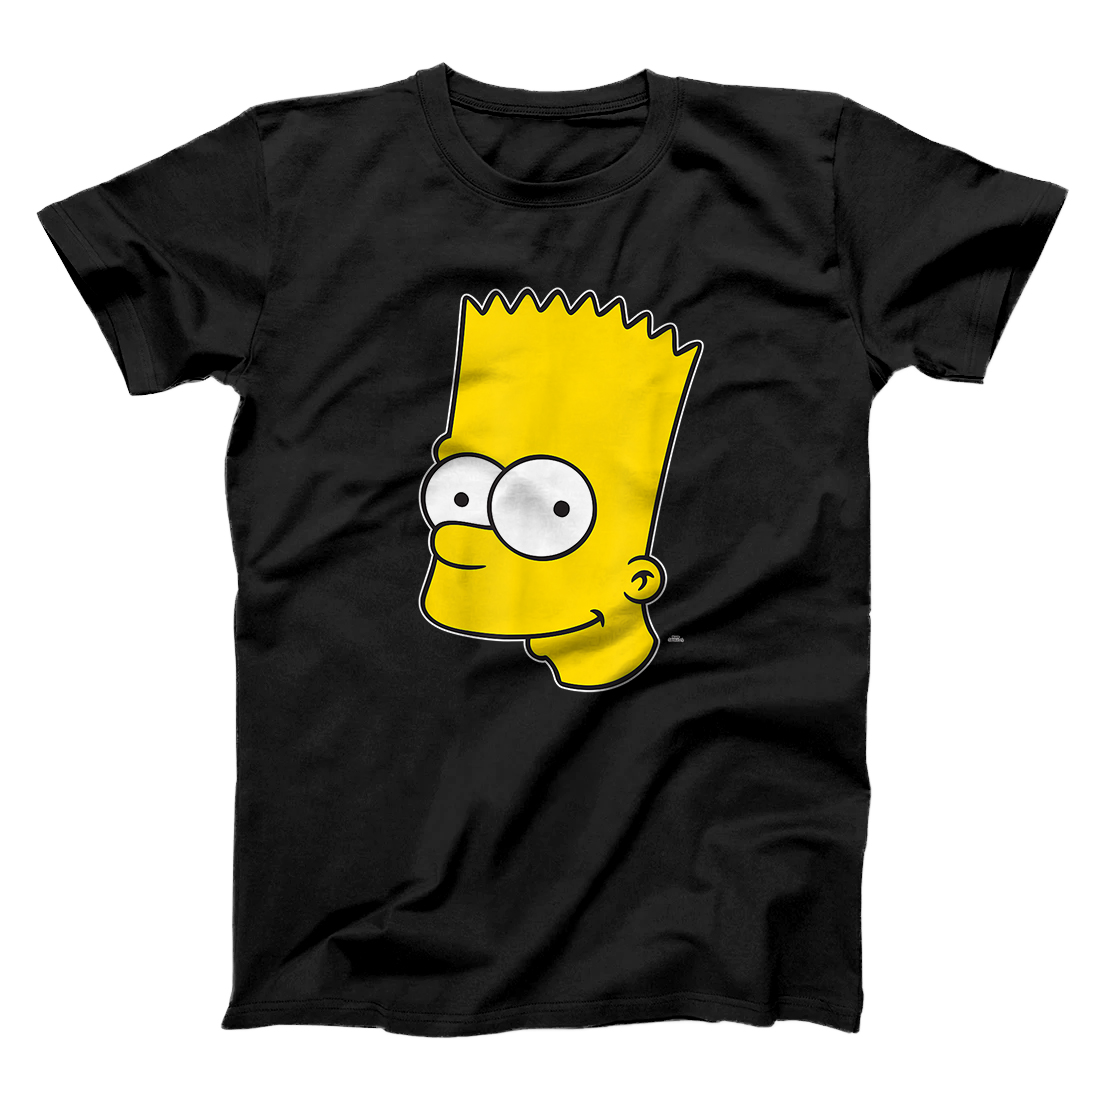 Personalized The Simpsons Bart Simpson Face T-Shirt